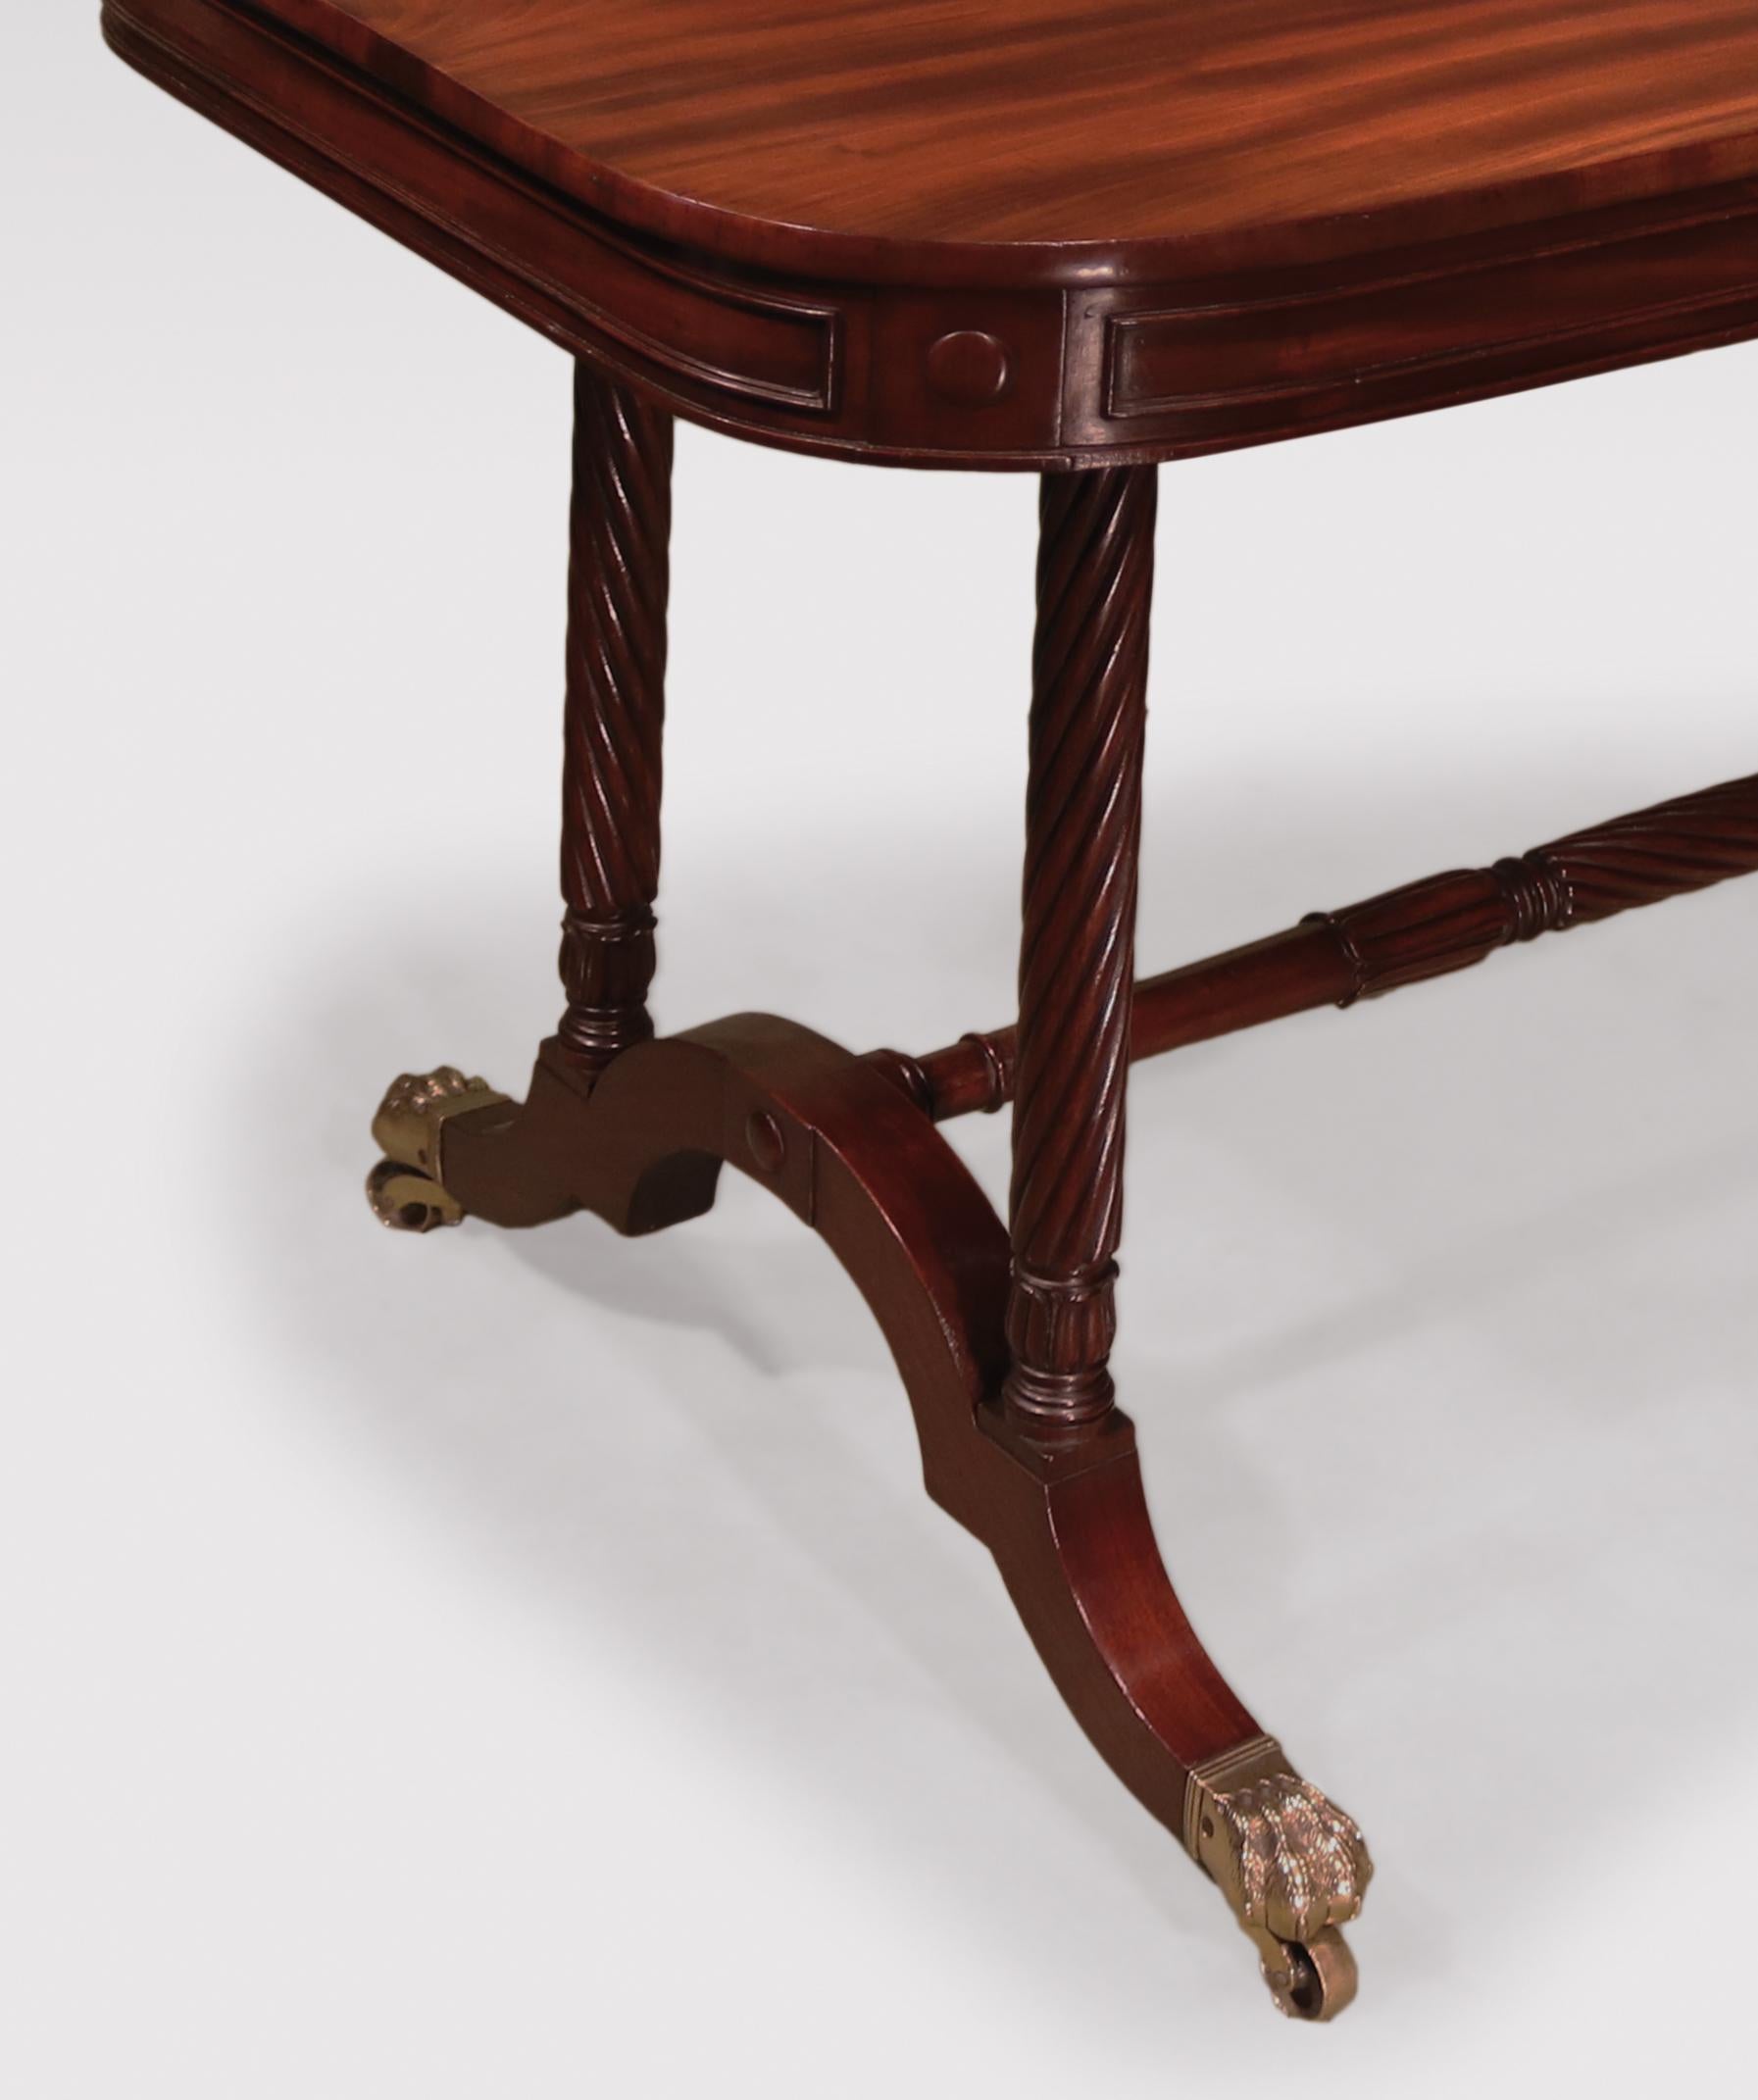 A fine quality early 19th century Regency period writing table stamped Gillows, veneered in finest quality figured mahogany, having rectangular top above narrow panelled frieze with button paterae to corners. The Table, supported on spiral twist